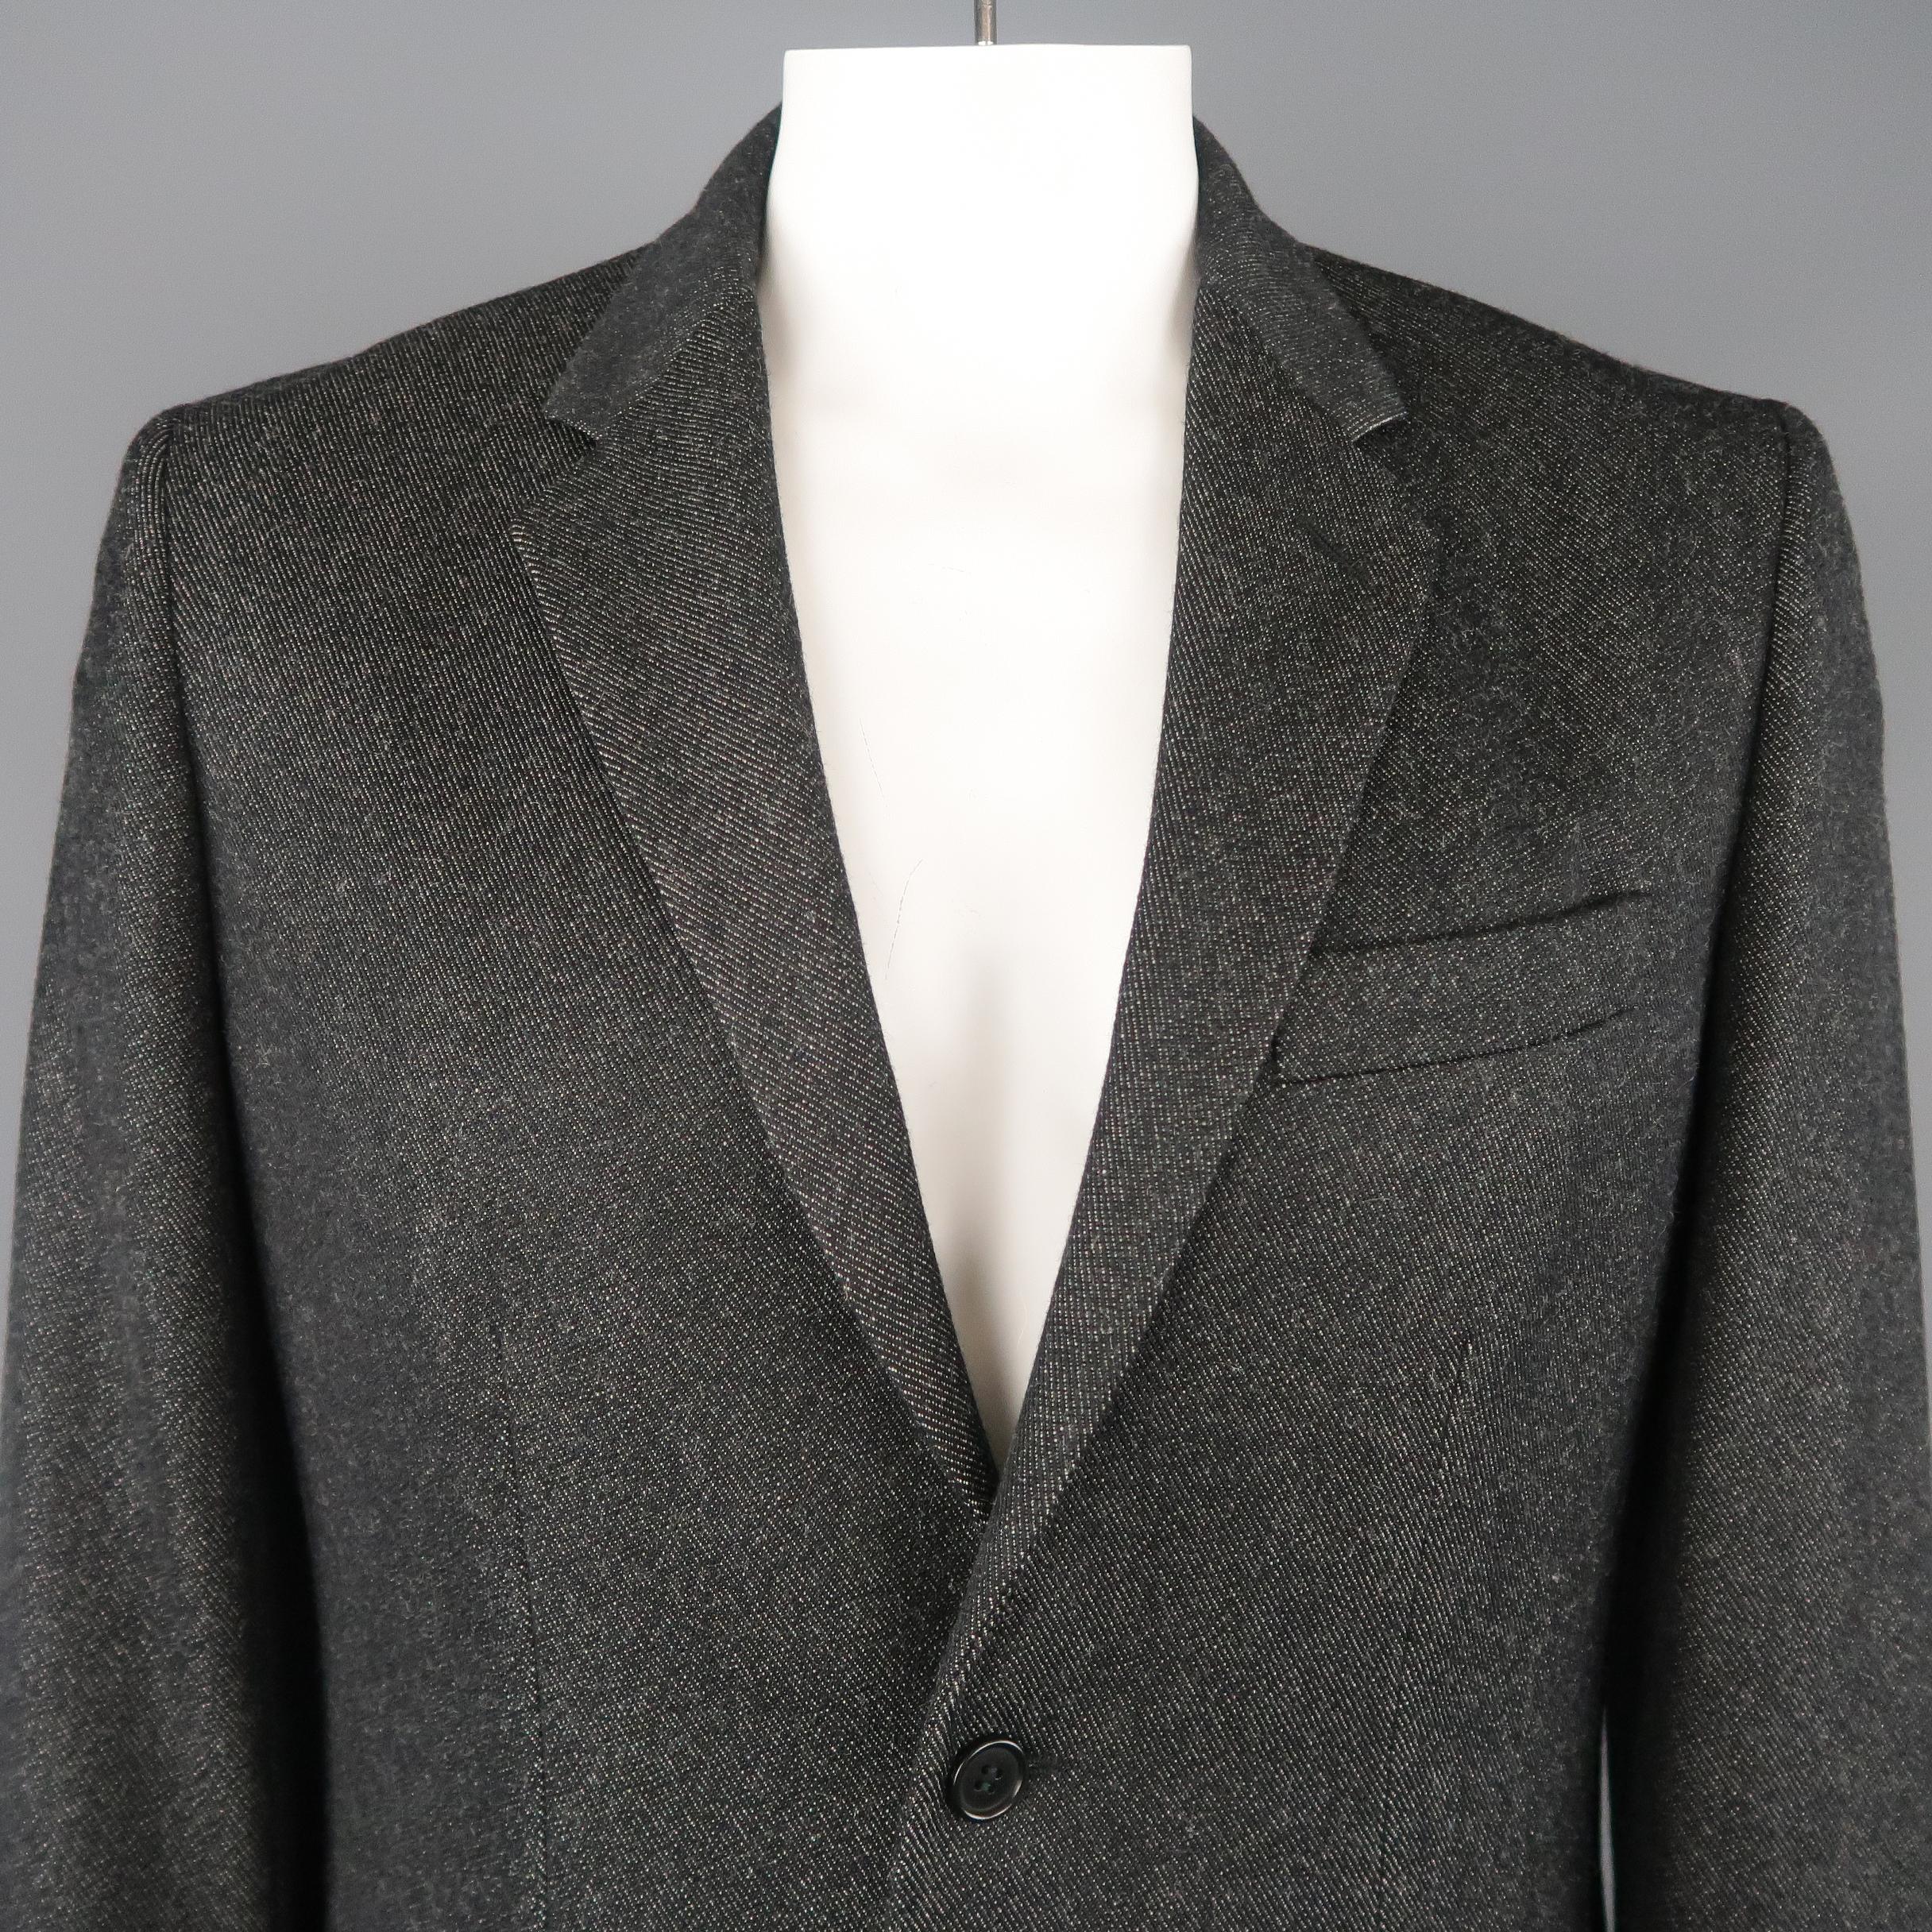 HELMUT LANG sport coat comes in charcoal textured wool twill with a notch lapel, single breasted two button front, and flap pockets. Made in Italy.
 
Excellent Pre-Owned Condition.
Marked: IT 52
 
Measurements:
 
Shoulder: 18 in.
Chest: 46